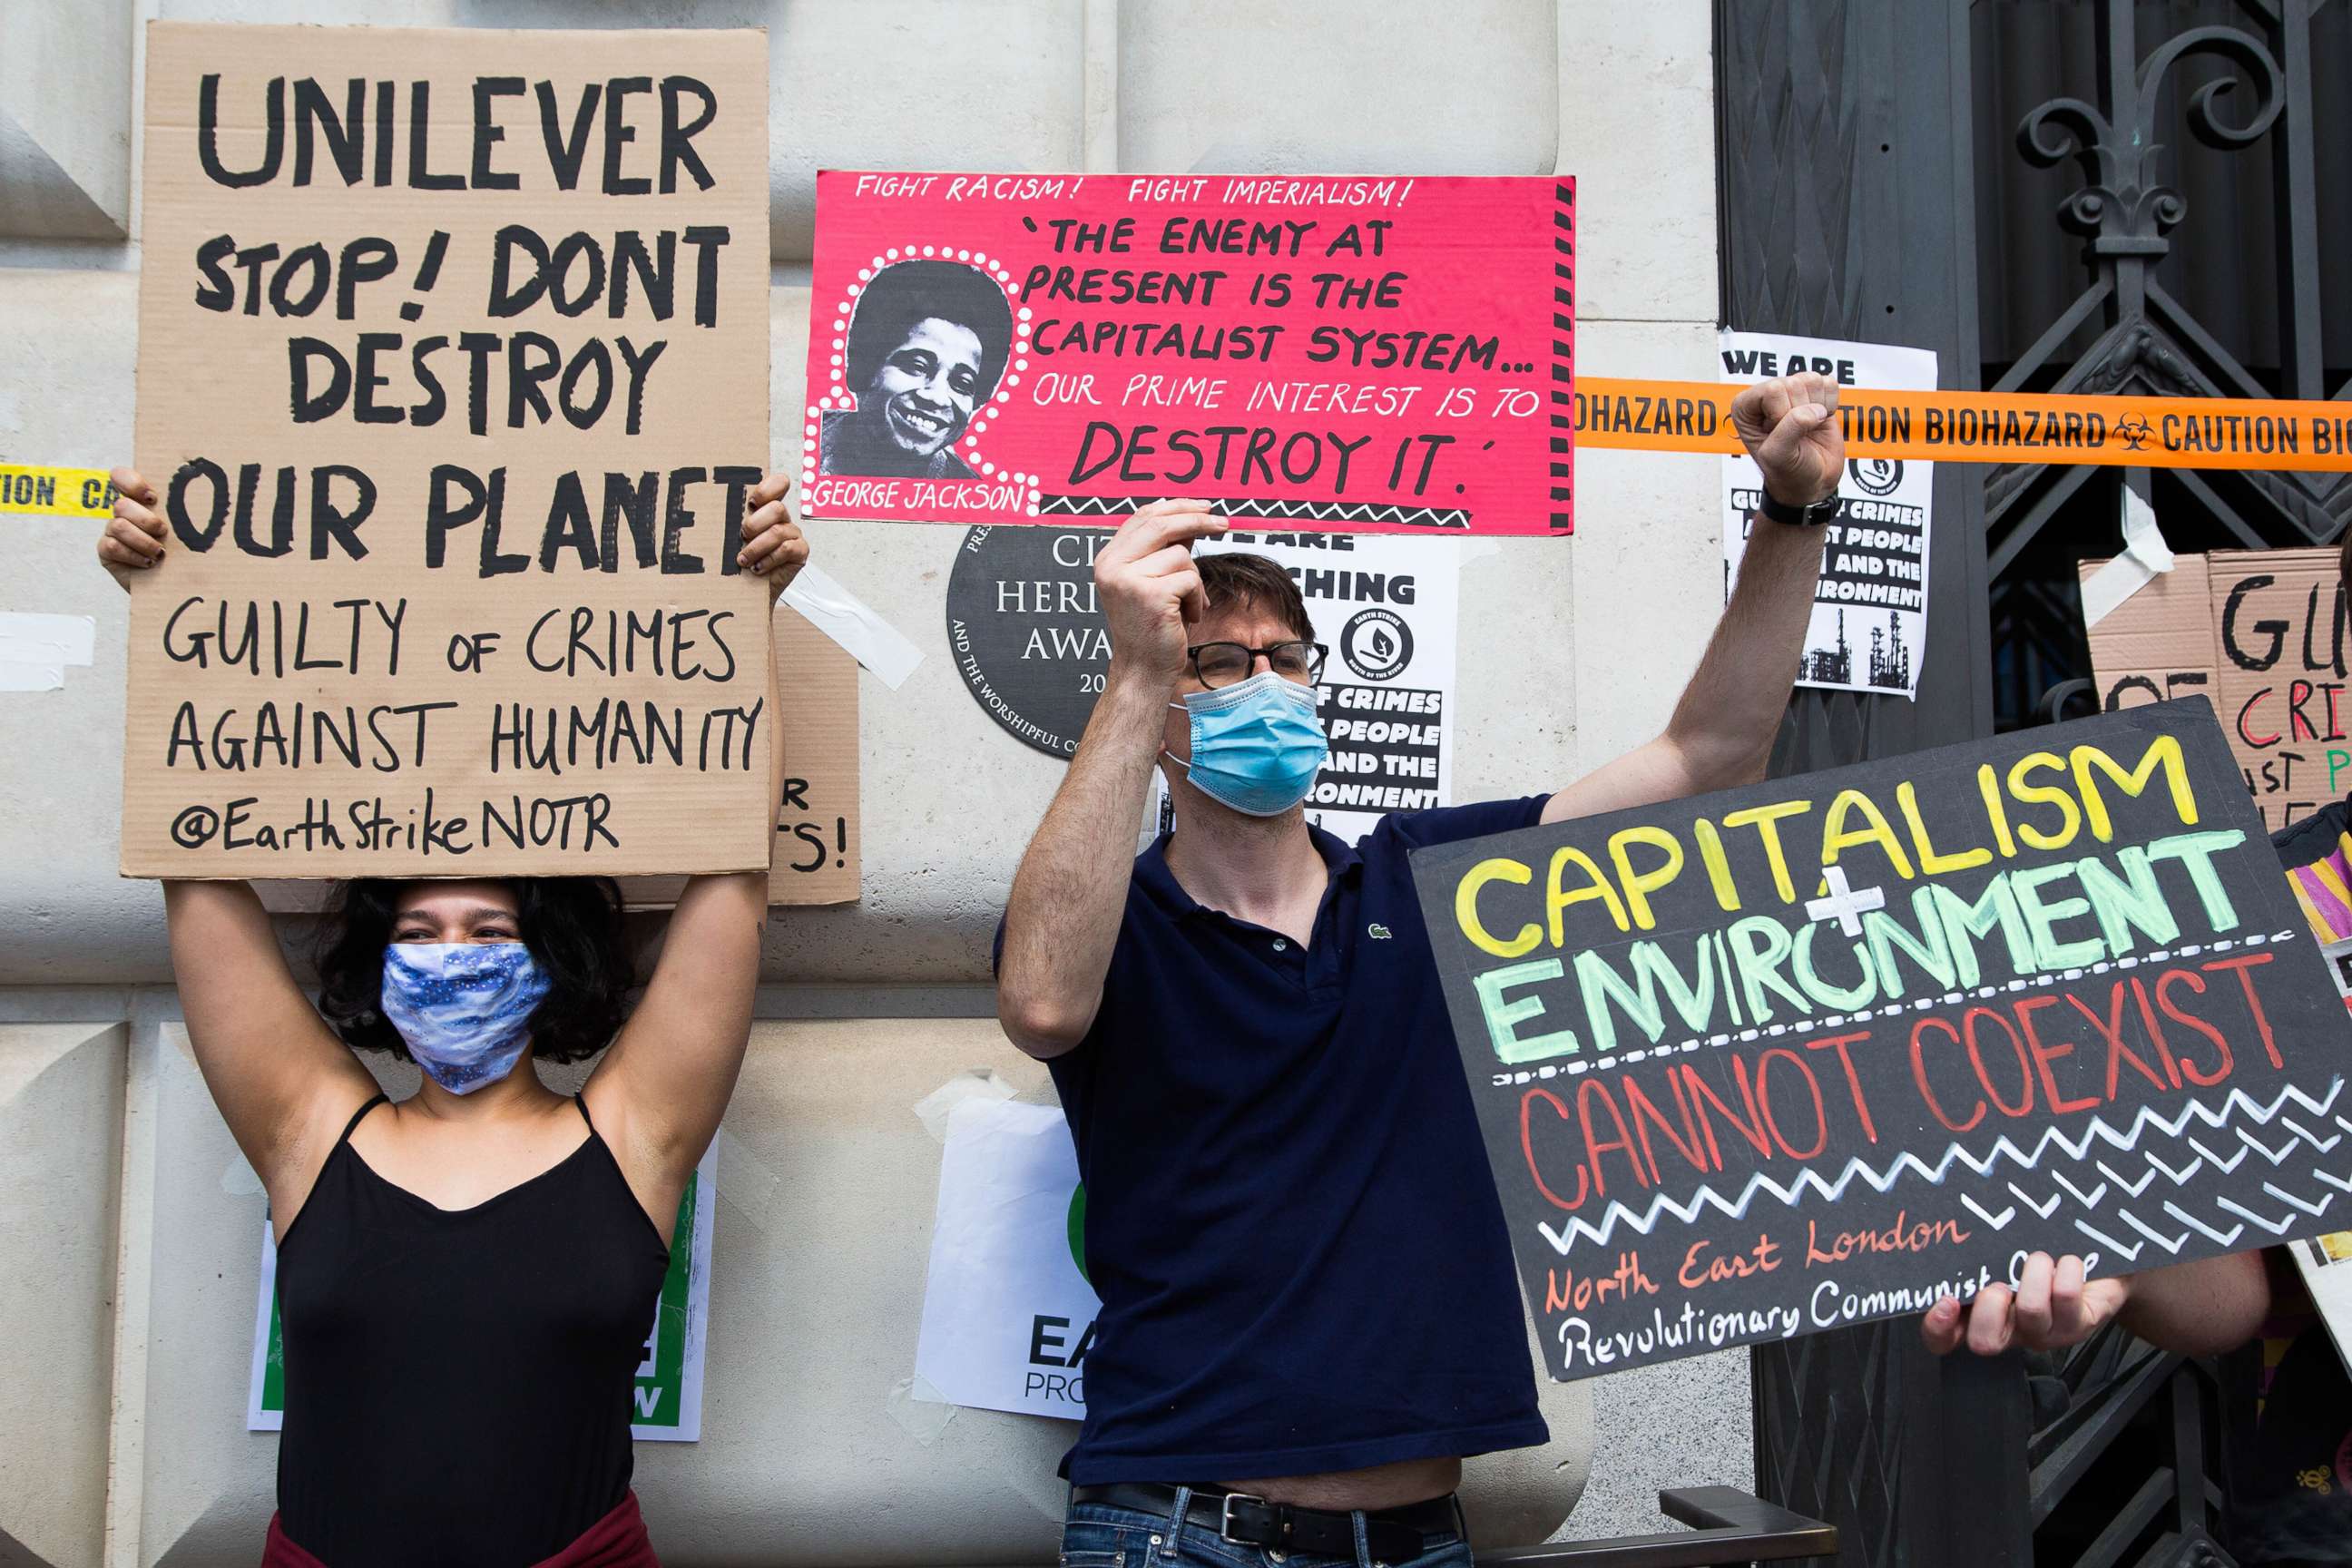 PHOTO: Protesters hold signs during the demonstration accusing Unilever of crimes against humans and the environment, July 11, 2020, outside the Unilever headquarters in London.